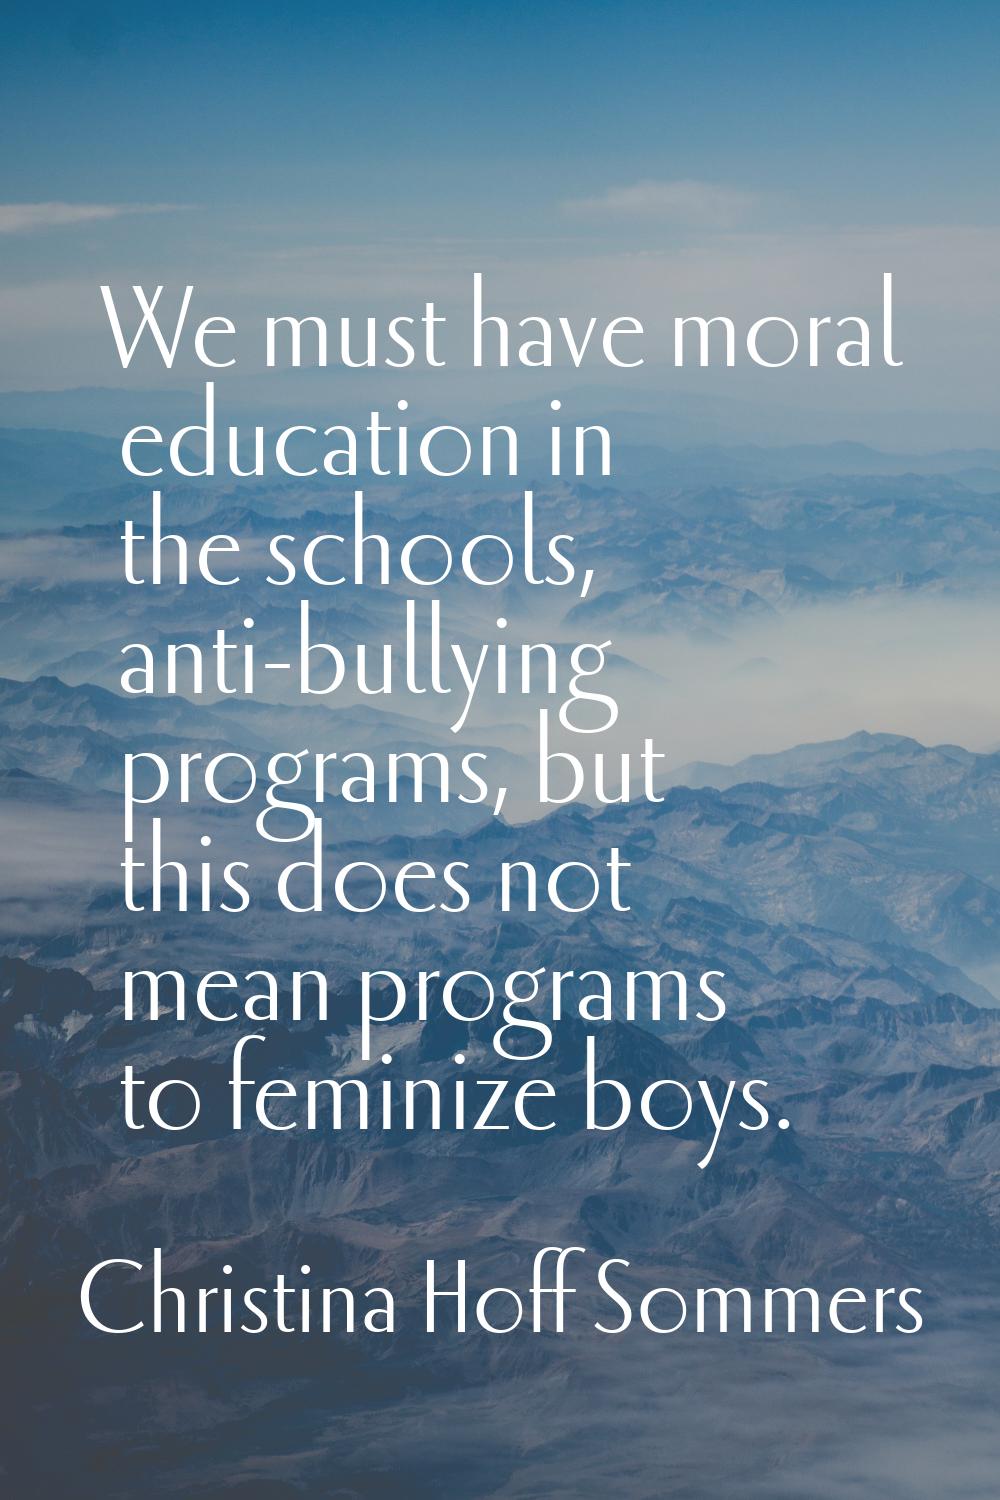 We must have moral education in the schools, anti-bullying programs, but this does not mean program